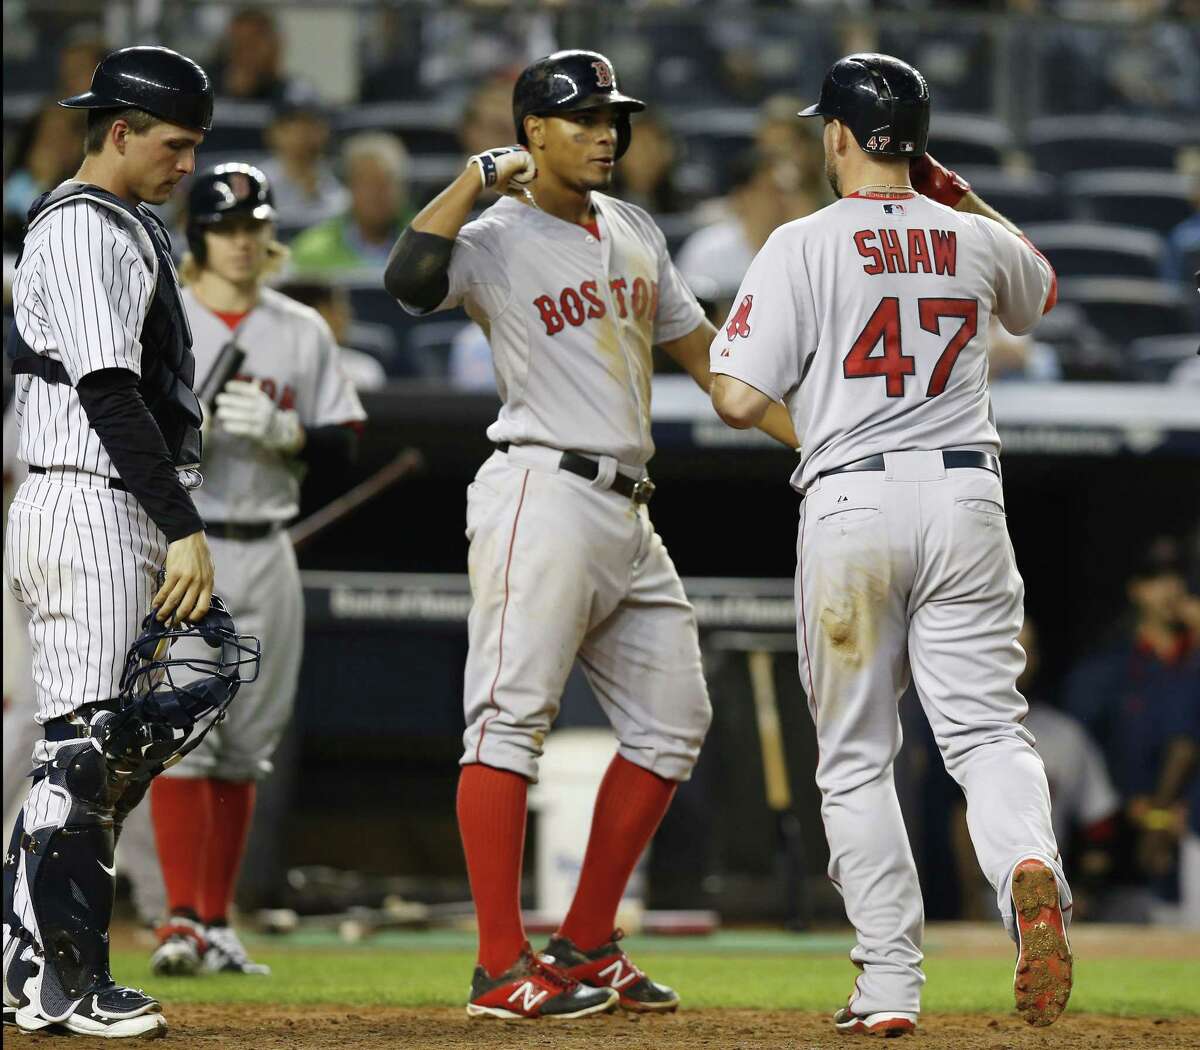 Yankees catcher John Ryan Murphy reacts as Xander Bogaerts, center, greets Red Sox’s Travis Shaw (47) after scoring on Shaw’s sixth-inning, two-run home run.